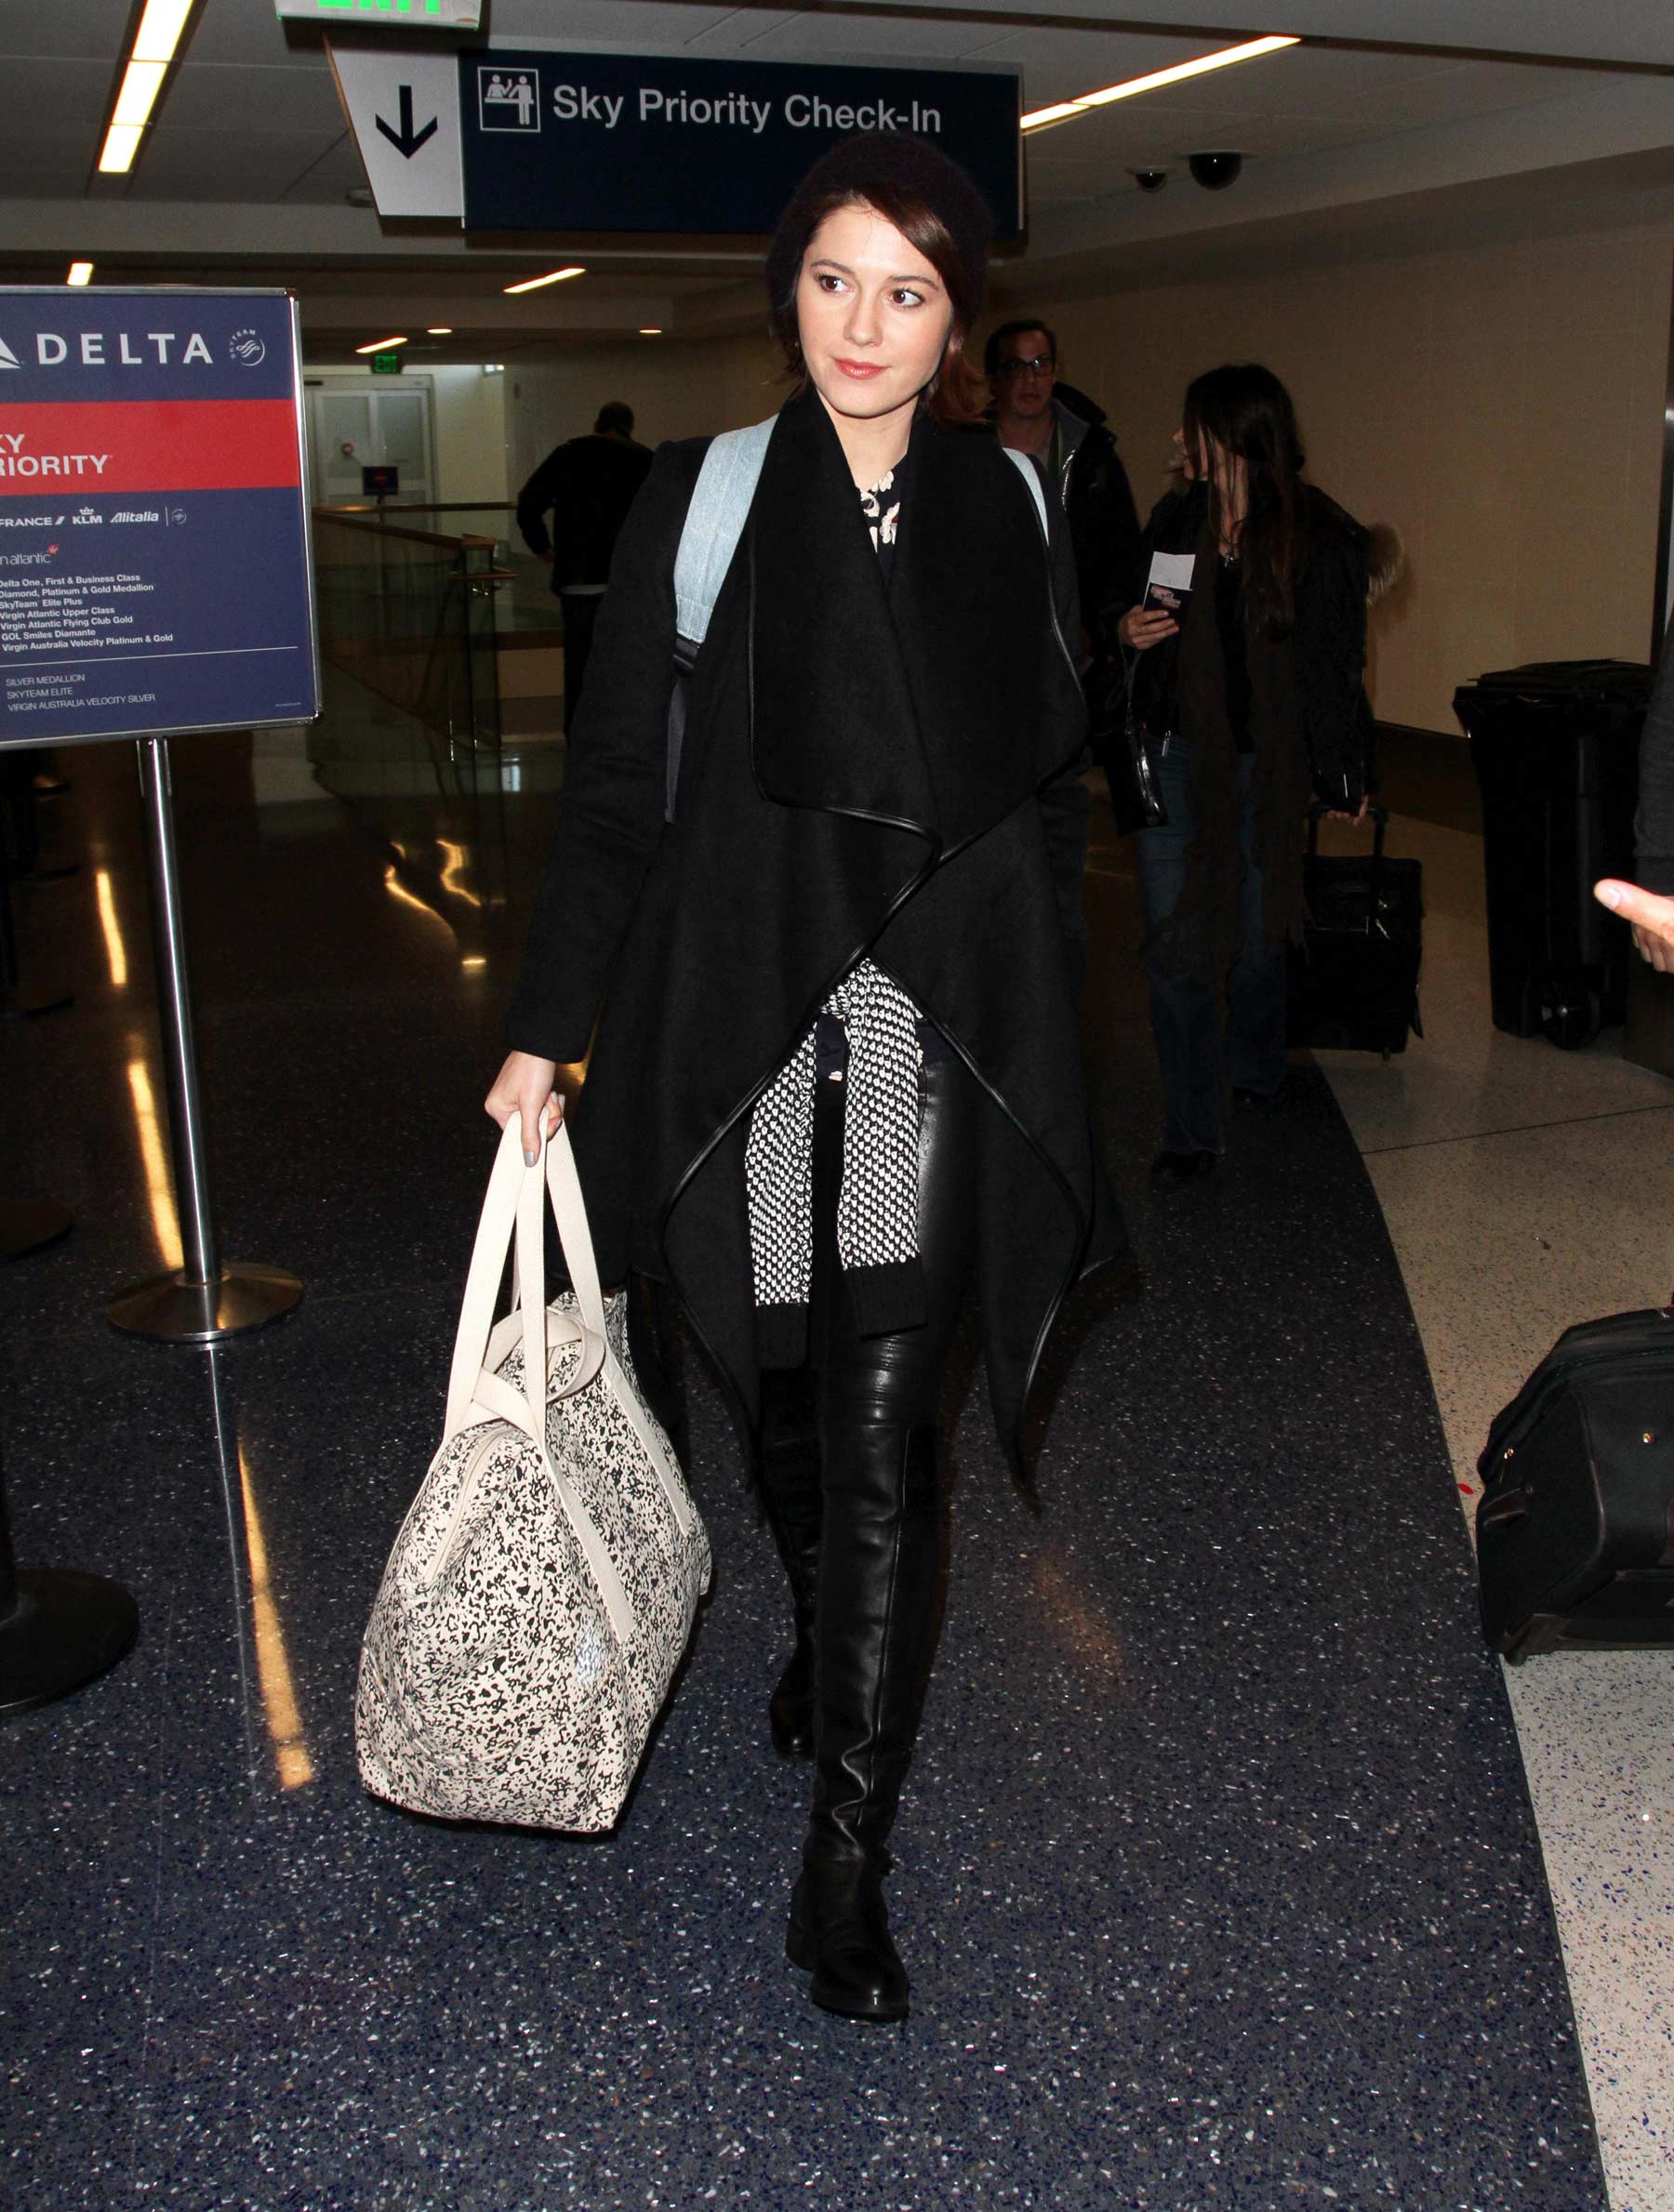 Mary Elizabeth Winstead arriving at the ariport